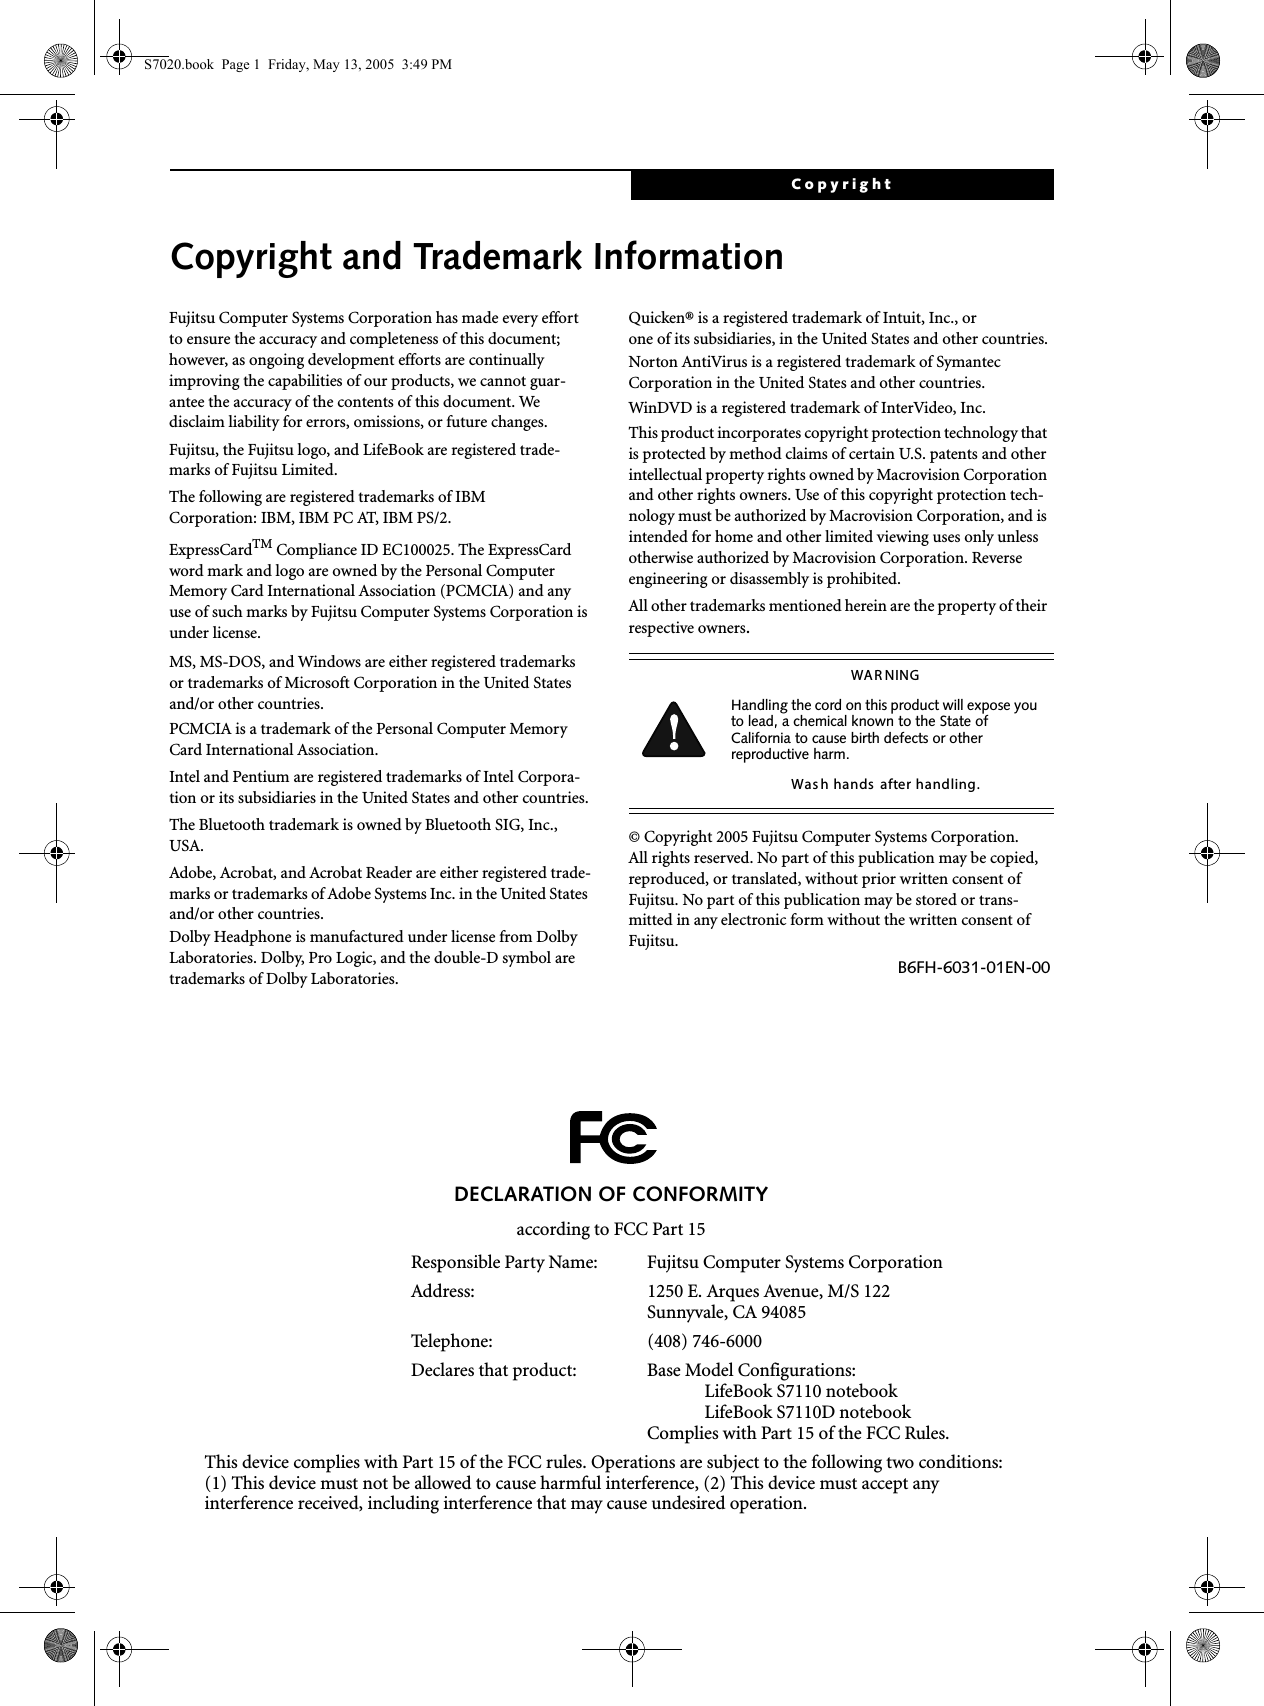 CopyrightCopyright and Trademark InformationFujitsu Computer Systems Corporation has made every effort to ensure the accuracy and completeness of this document; however, as ongoing development efforts are continually improving the capabilities of our products, we cannot guar-antee the accuracy of the contents of this document. We disclaim liability for errors, omissions, or future changes.Fujitsu, the Fujitsu logo, and LifeBook are registered trade-marks of Fujitsu Limited.The following are registered trademarks of IBM Corporation: IBM, IBM PC AT, IBM PS/2. ExpressCardTM Compliance ID EC100025. The ExpressCard word mark and logo are owned by the Personal Computer Memory Card International Association (PCMCIA) and any use of such marks by Fujitsu Computer Systems Corporation is under license. MS, MS-DOS, and Windows are either registered trademarks or trademarks of Microsoft Corporation in the United States and/or other countries.PCMCIA is a trademark of the Personal Computer Memory Card International Association.Intel and Pentium are registered trademarks of Intel Corpora-tion or its subsidiaries in the United States and other countries.The Bluetooth trademark is owned by Bluetooth SIG, Inc., USA.Adobe, Acrobat, and Acrobat Reader are either registered trade-marks or trademarks of Adobe Systems Inc. in the United States and/or other countries.Dolby Headphone is manufactured under license from Dolby Laboratories. Dolby, Pro Logic, and the double-D symbol are trademarks of Dolby Laboratories.Quicken® is a registered trademark of Intuit, Inc., or one of its subsidiaries, in the United States and other countries.Norton AntiVirus is a registered trademark of Symantec Corporation in the United States and other countries.WinDVD is a registered trademark of InterVideo, Inc.This product incorporates copyright protection technology that is protected by method claims of certain U.S. patents and other intellectual property rights owned by Macrovision Corporation and other rights owners. Use of this copyright protection tech-nology must be authorized by Macrovision Corporation, and is intended for home and other limited viewing uses only unless otherwise authorized by Macrovision Corporation. Reverse engineering or disassembly is prohibited.All other trademarks mentioned herein are the property of their respective owners.© Copyright 2005 Fujitsu Computer Systems Corporation. All rights reserved. No part of this publication may be copied, reproduced, or translated, without prior written consent of Fujitsu. No part of this publication may be stored or trans-mitted in any electronic form without the written consent of Fujitsu.B6FH-6031-01EN-00WAR NINGHandling the cord on this product will expose you to lead, a chemical known to the State of California to cause birth defects or other reproductive harm. Was h hands  after handling.DECLARATION OF CONFORMITYaccording to FCC Part 15Responsible Party Name: Fujitsu Computer Systems CorporationAddress:  1250 E. Arques Avenue, M/S 122Sunnyvale, CA 94085Telephone: (408) 746-6000Declares that product: Base Model Configurations:LifeBook S7110 notebookLifeBook S7110D notebookComplies with Part 15 of the FCC Rules.This device complies with Part 15 of the FCC rules. Operations are subject to the following two conditions:(1) This device must not be allowed to cause harmful interference, (2) This device must accept anyinterference received, including interference that may cause undesired operation.S7020.book  Page 1  Friday, May 13, 2005  3:49 PM